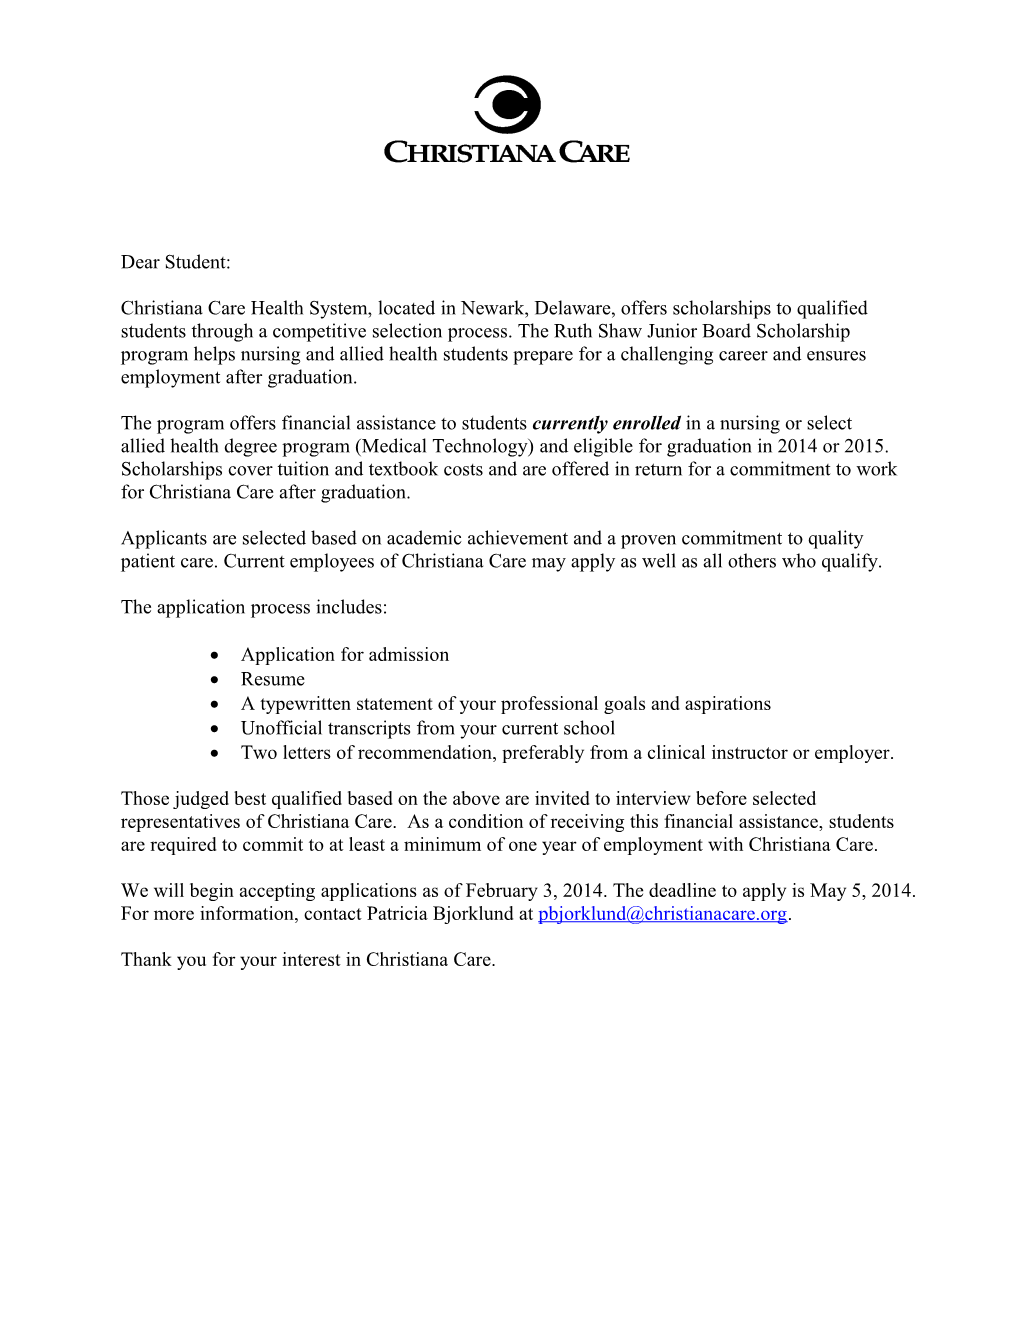 Christiana Care Health System, Located in Newark, Delaware, Offers Scholarships to Qualified